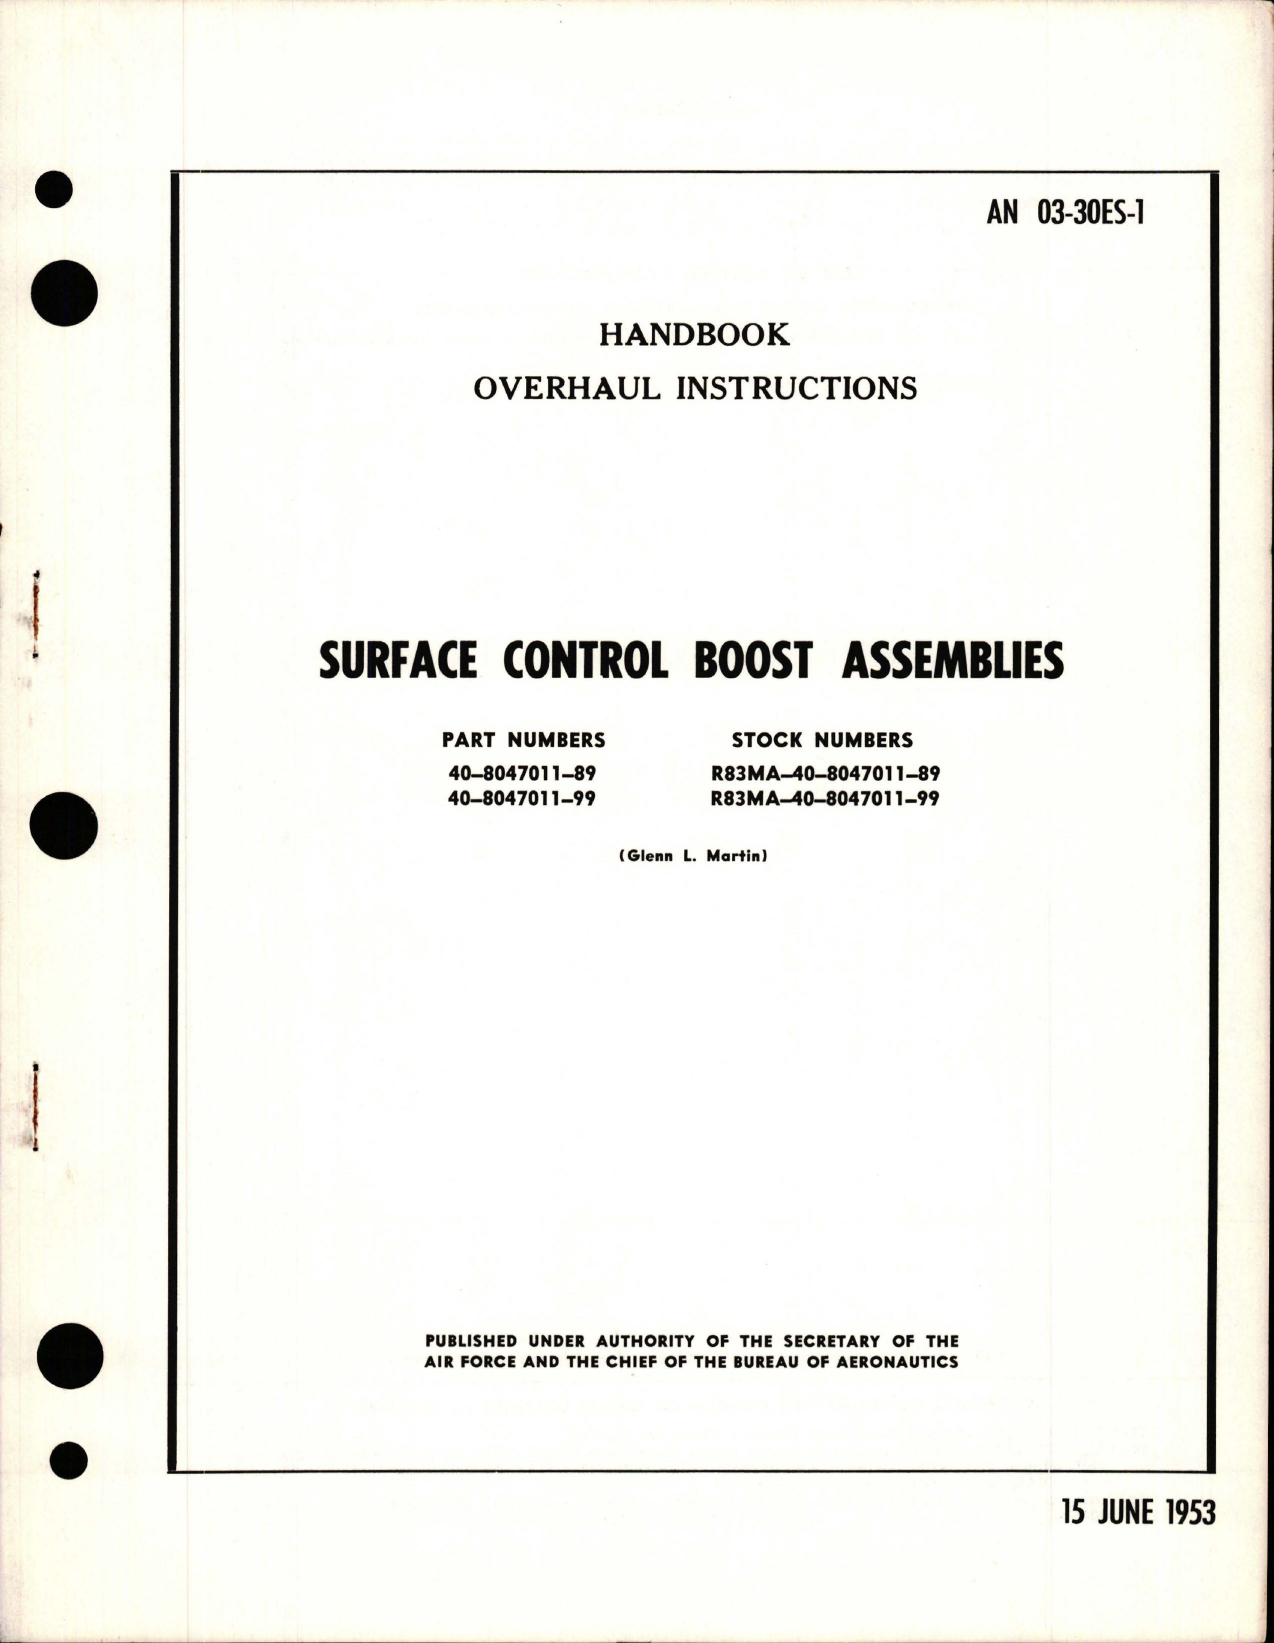 Sample page 1 from AirCorps Library document: Overhaul Instructions for Surface Control Boost Assembly - Parts 40-8047011-89 and 40-8047011-99 